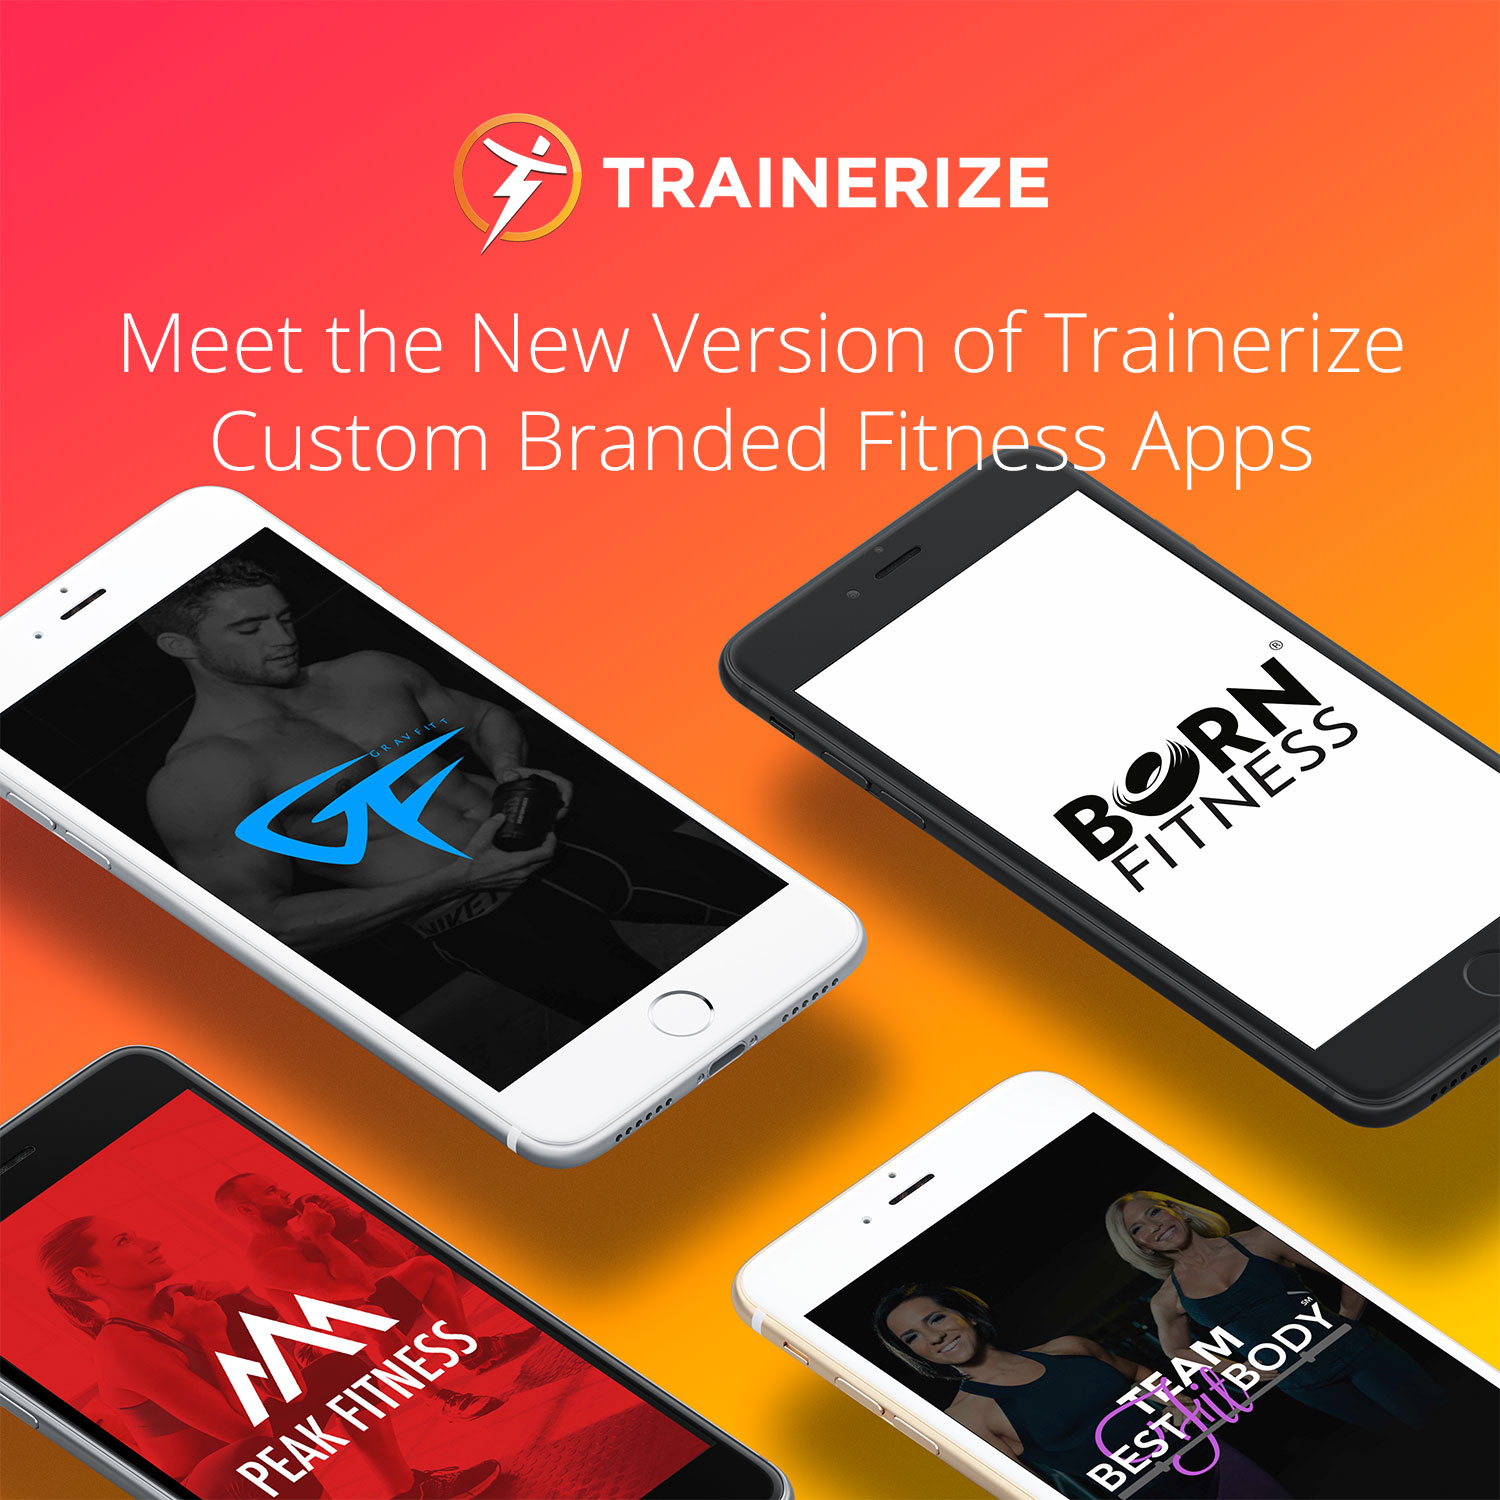 Trainerize Update: Meet the New Version of Trainerize Custom Branded Fitness Apps